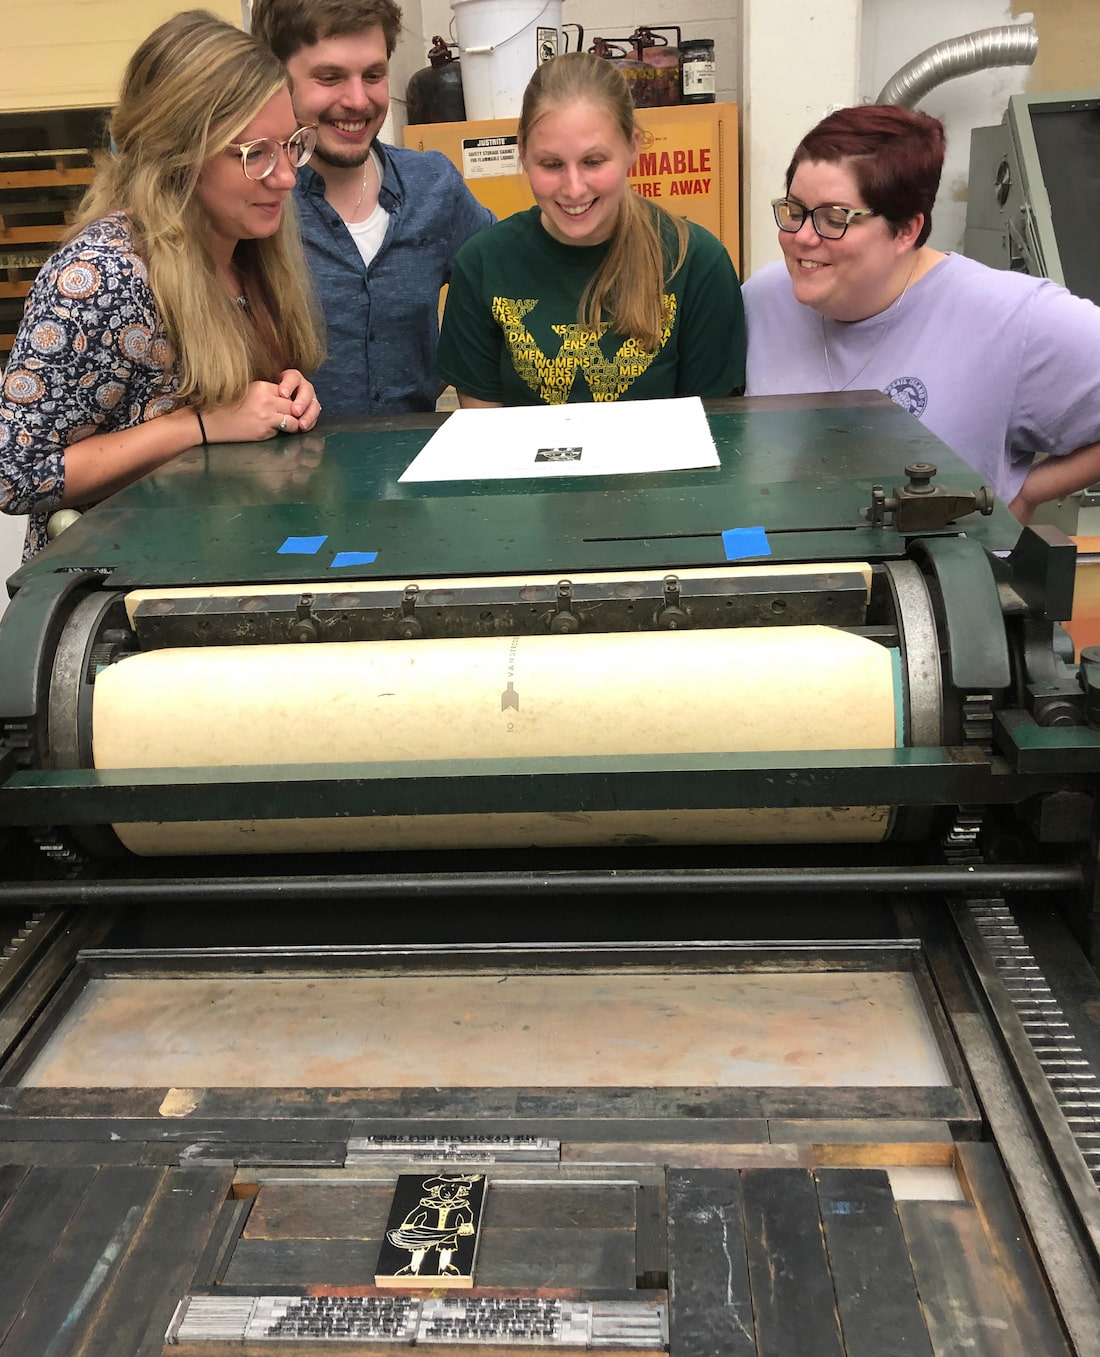 Students in Professor Chess' ENG 8002 class overlooking their work on the Vandercook Press